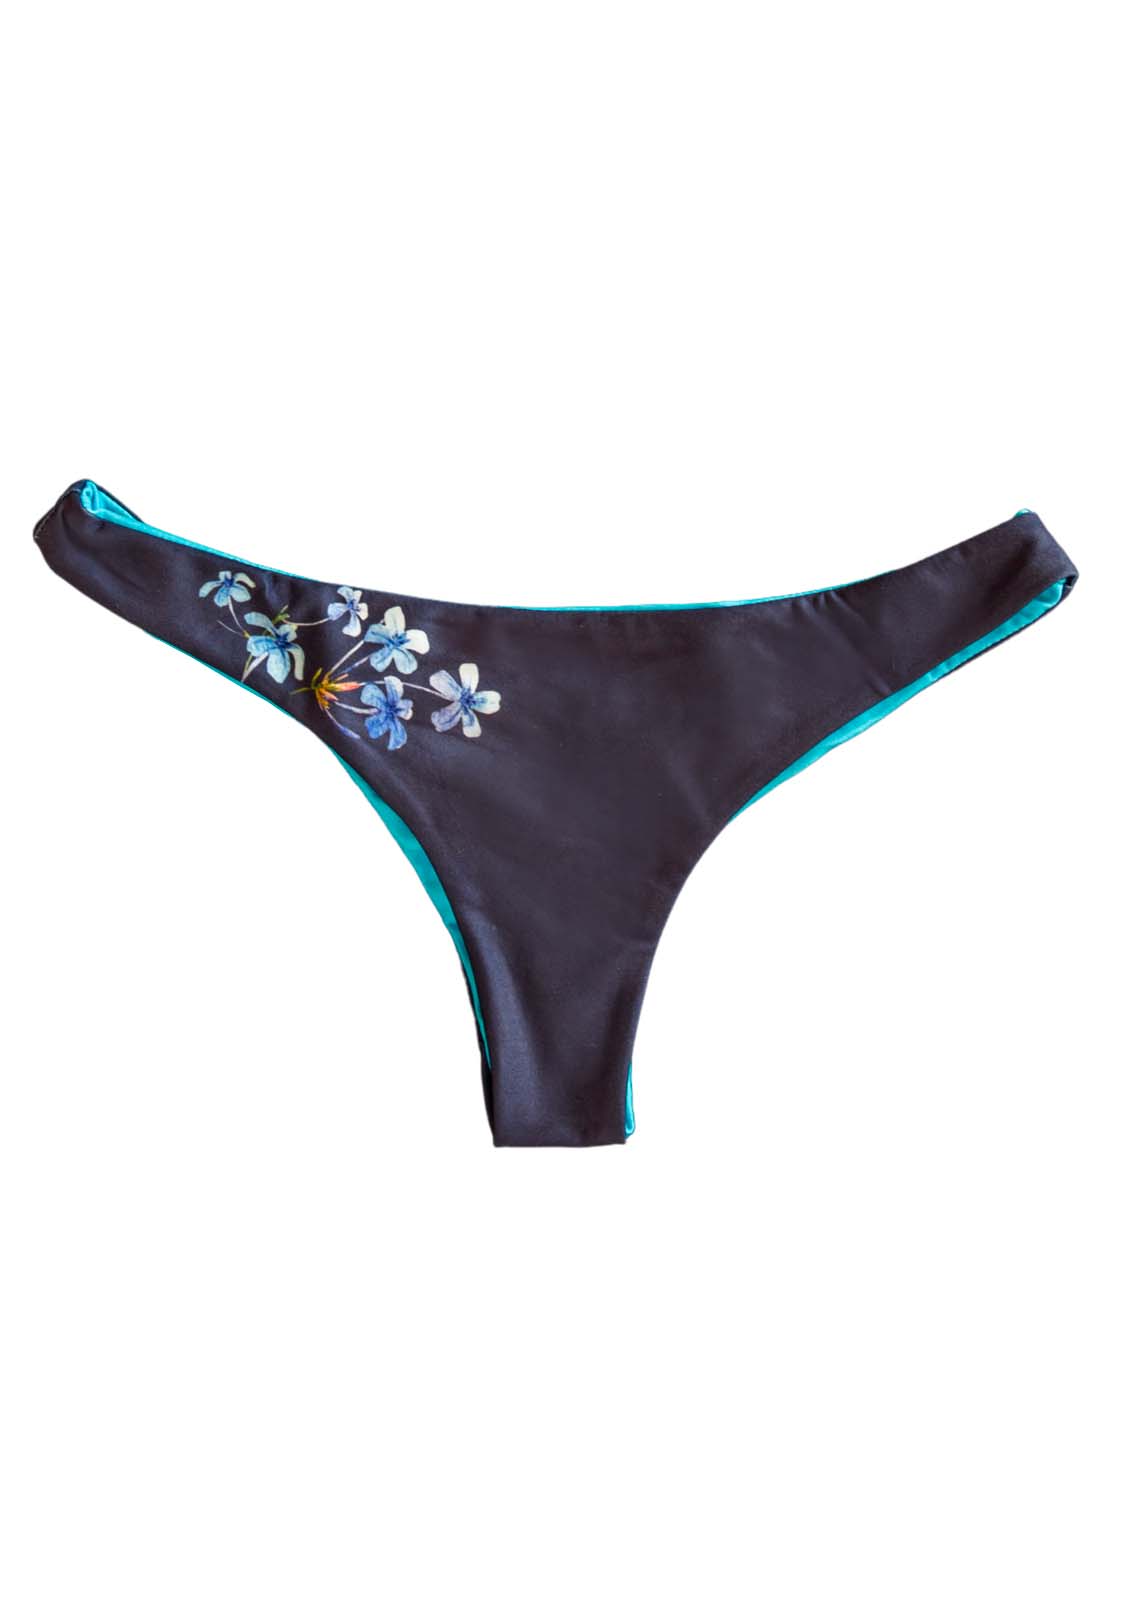 VIOLA - RUCHED CHEEKY BOTTOMS Reversible